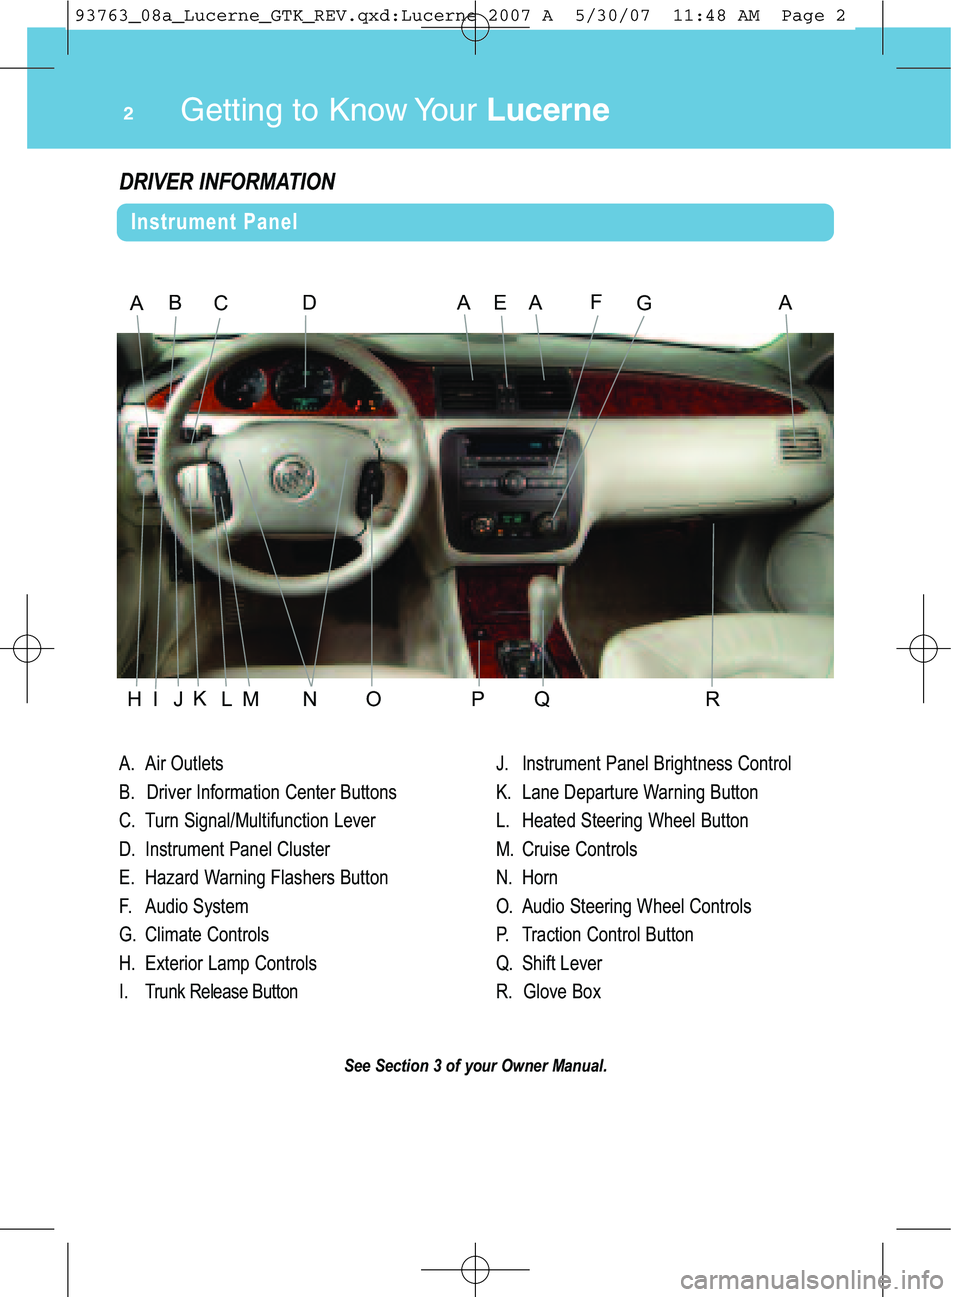 BUICK LUCERNE 2008  Get To Know Guide Get ti\b g to K\bow Yo\fr\fucerne2
A\b Air Outl ets
B\b Dr iver Informa tionCent erBut tons
C\b Tu rn Sign al/Mul tifunction Lever
D\b Inst rume ntPanel Cluster
E\b Ha zard Warni ngFlashers Button
F\b